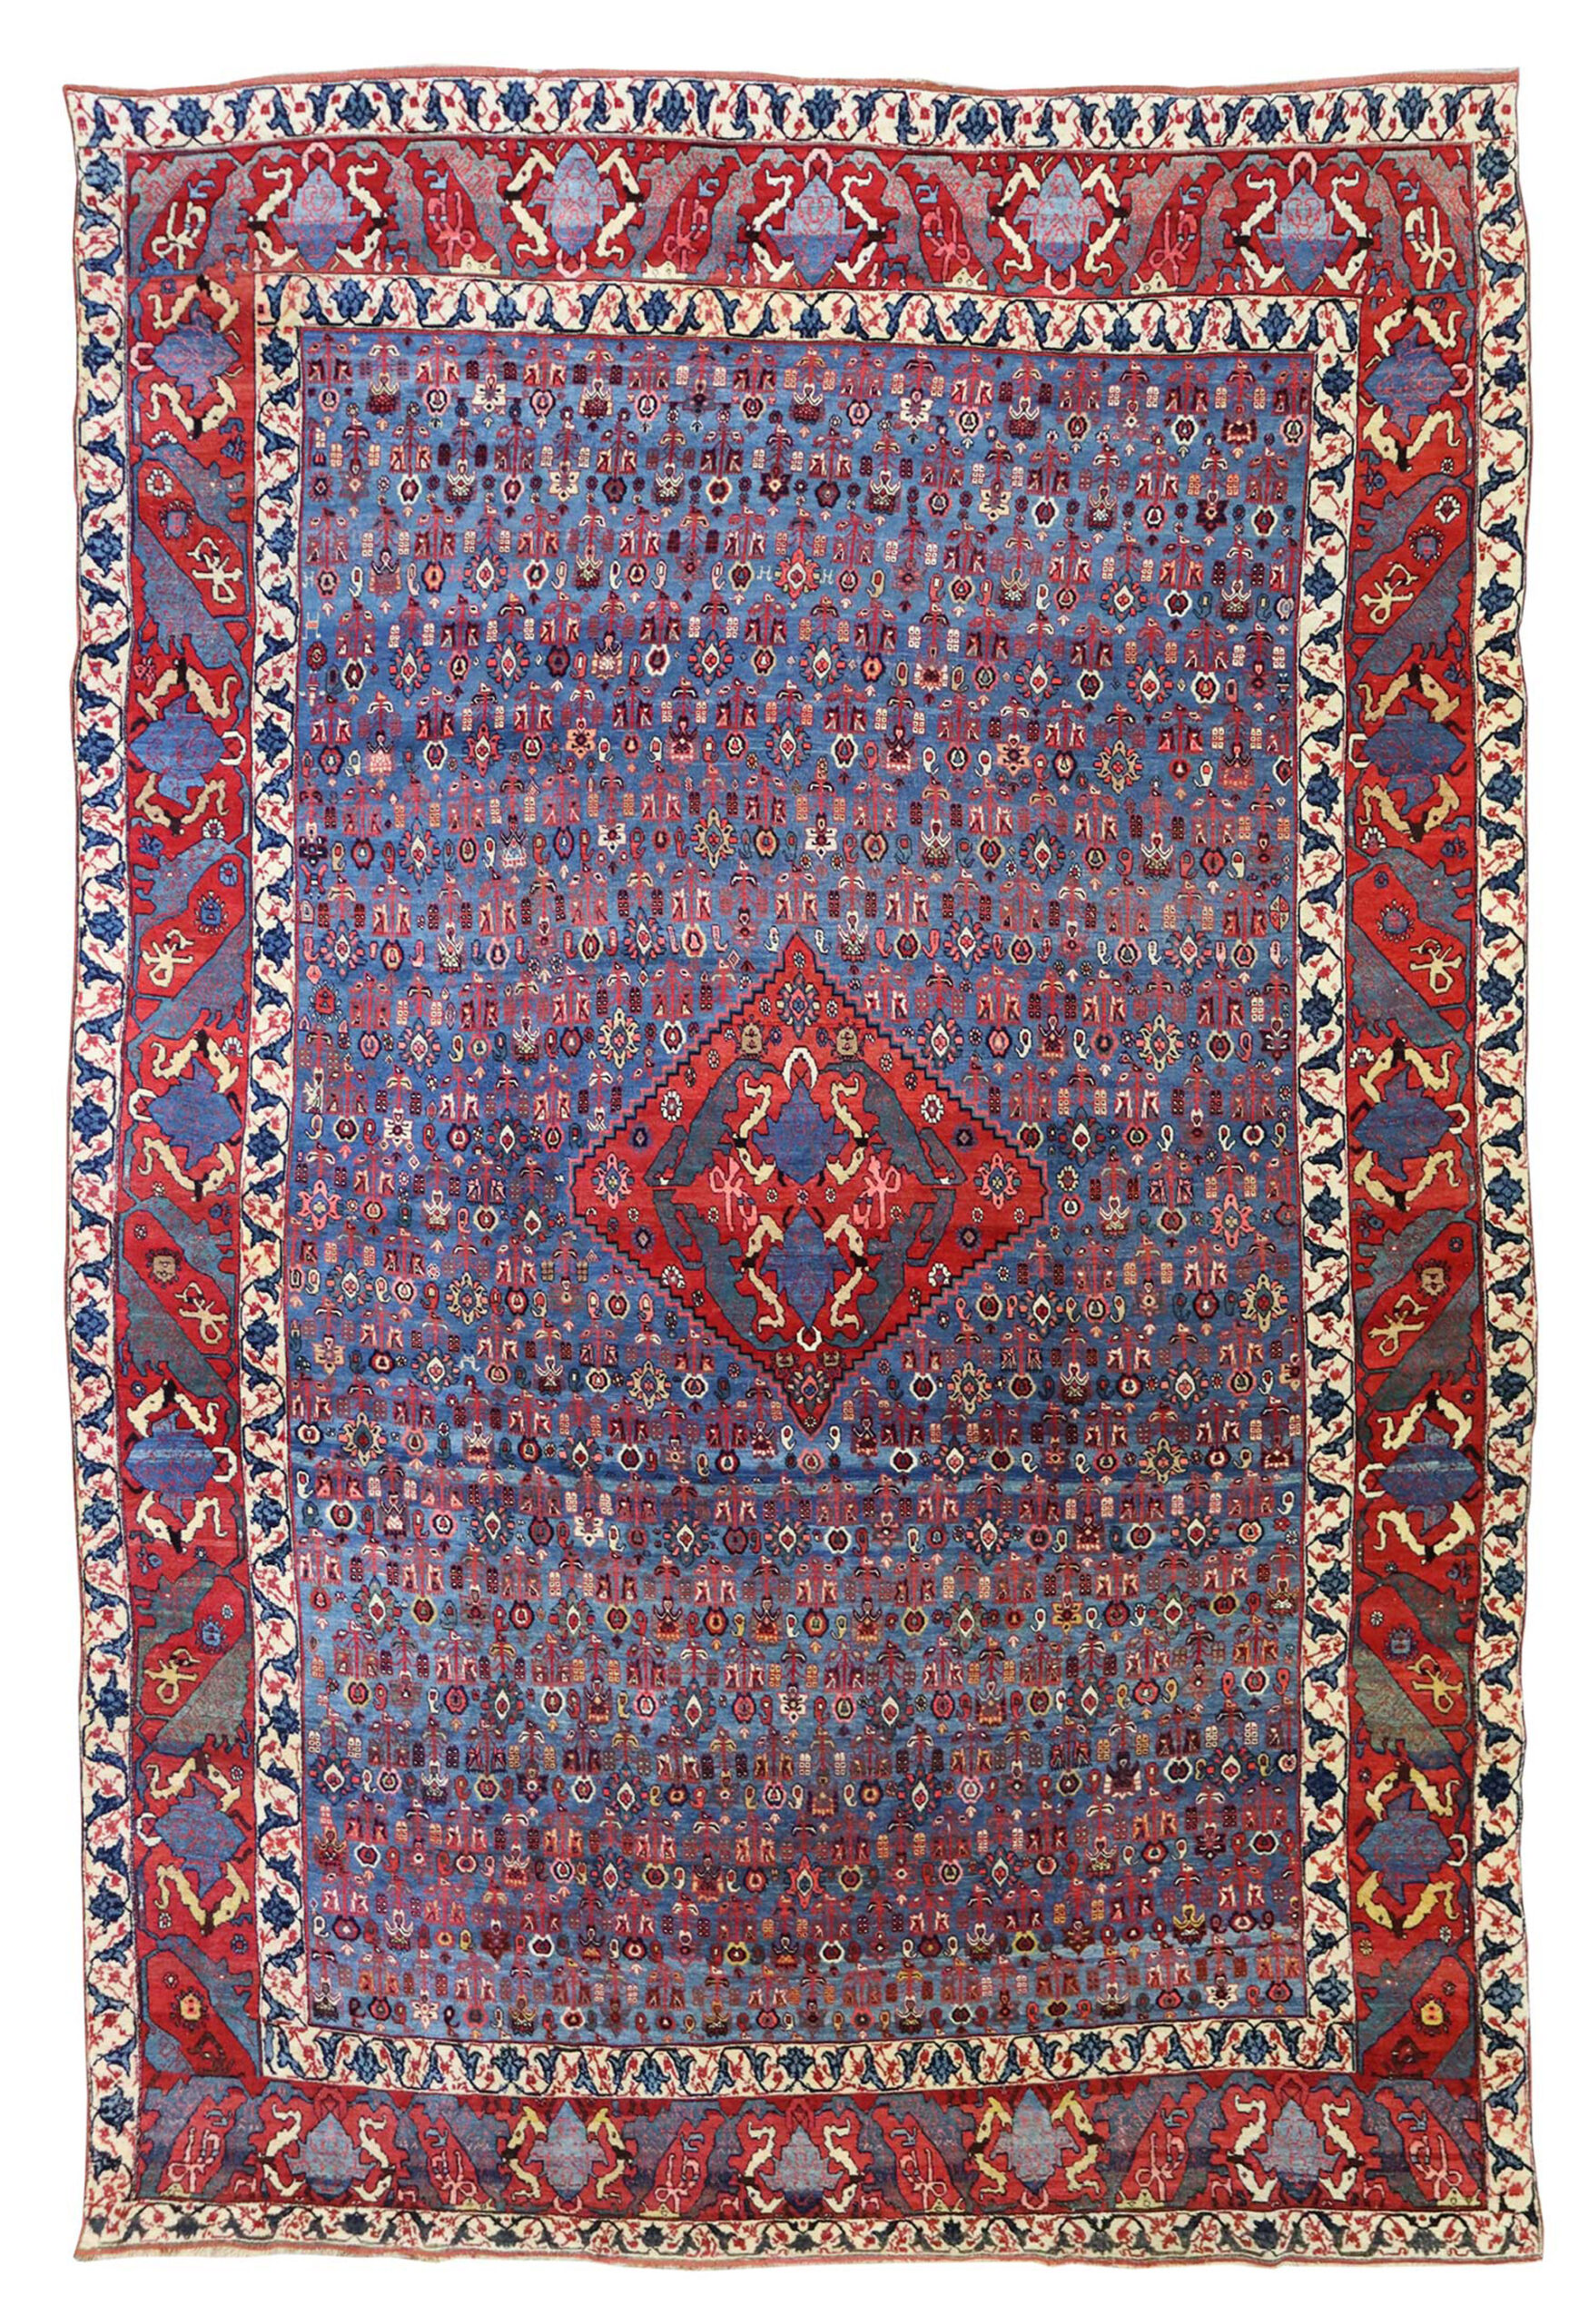 An early antique Bidjar carpet, northwest Persia, circa 1890, of the "Gerus" type featuring an uncommon design of small, stylized flowers on a mid blue field. Douglas Stock Gallery, antique rugs Bston,MA area South Natick,MA